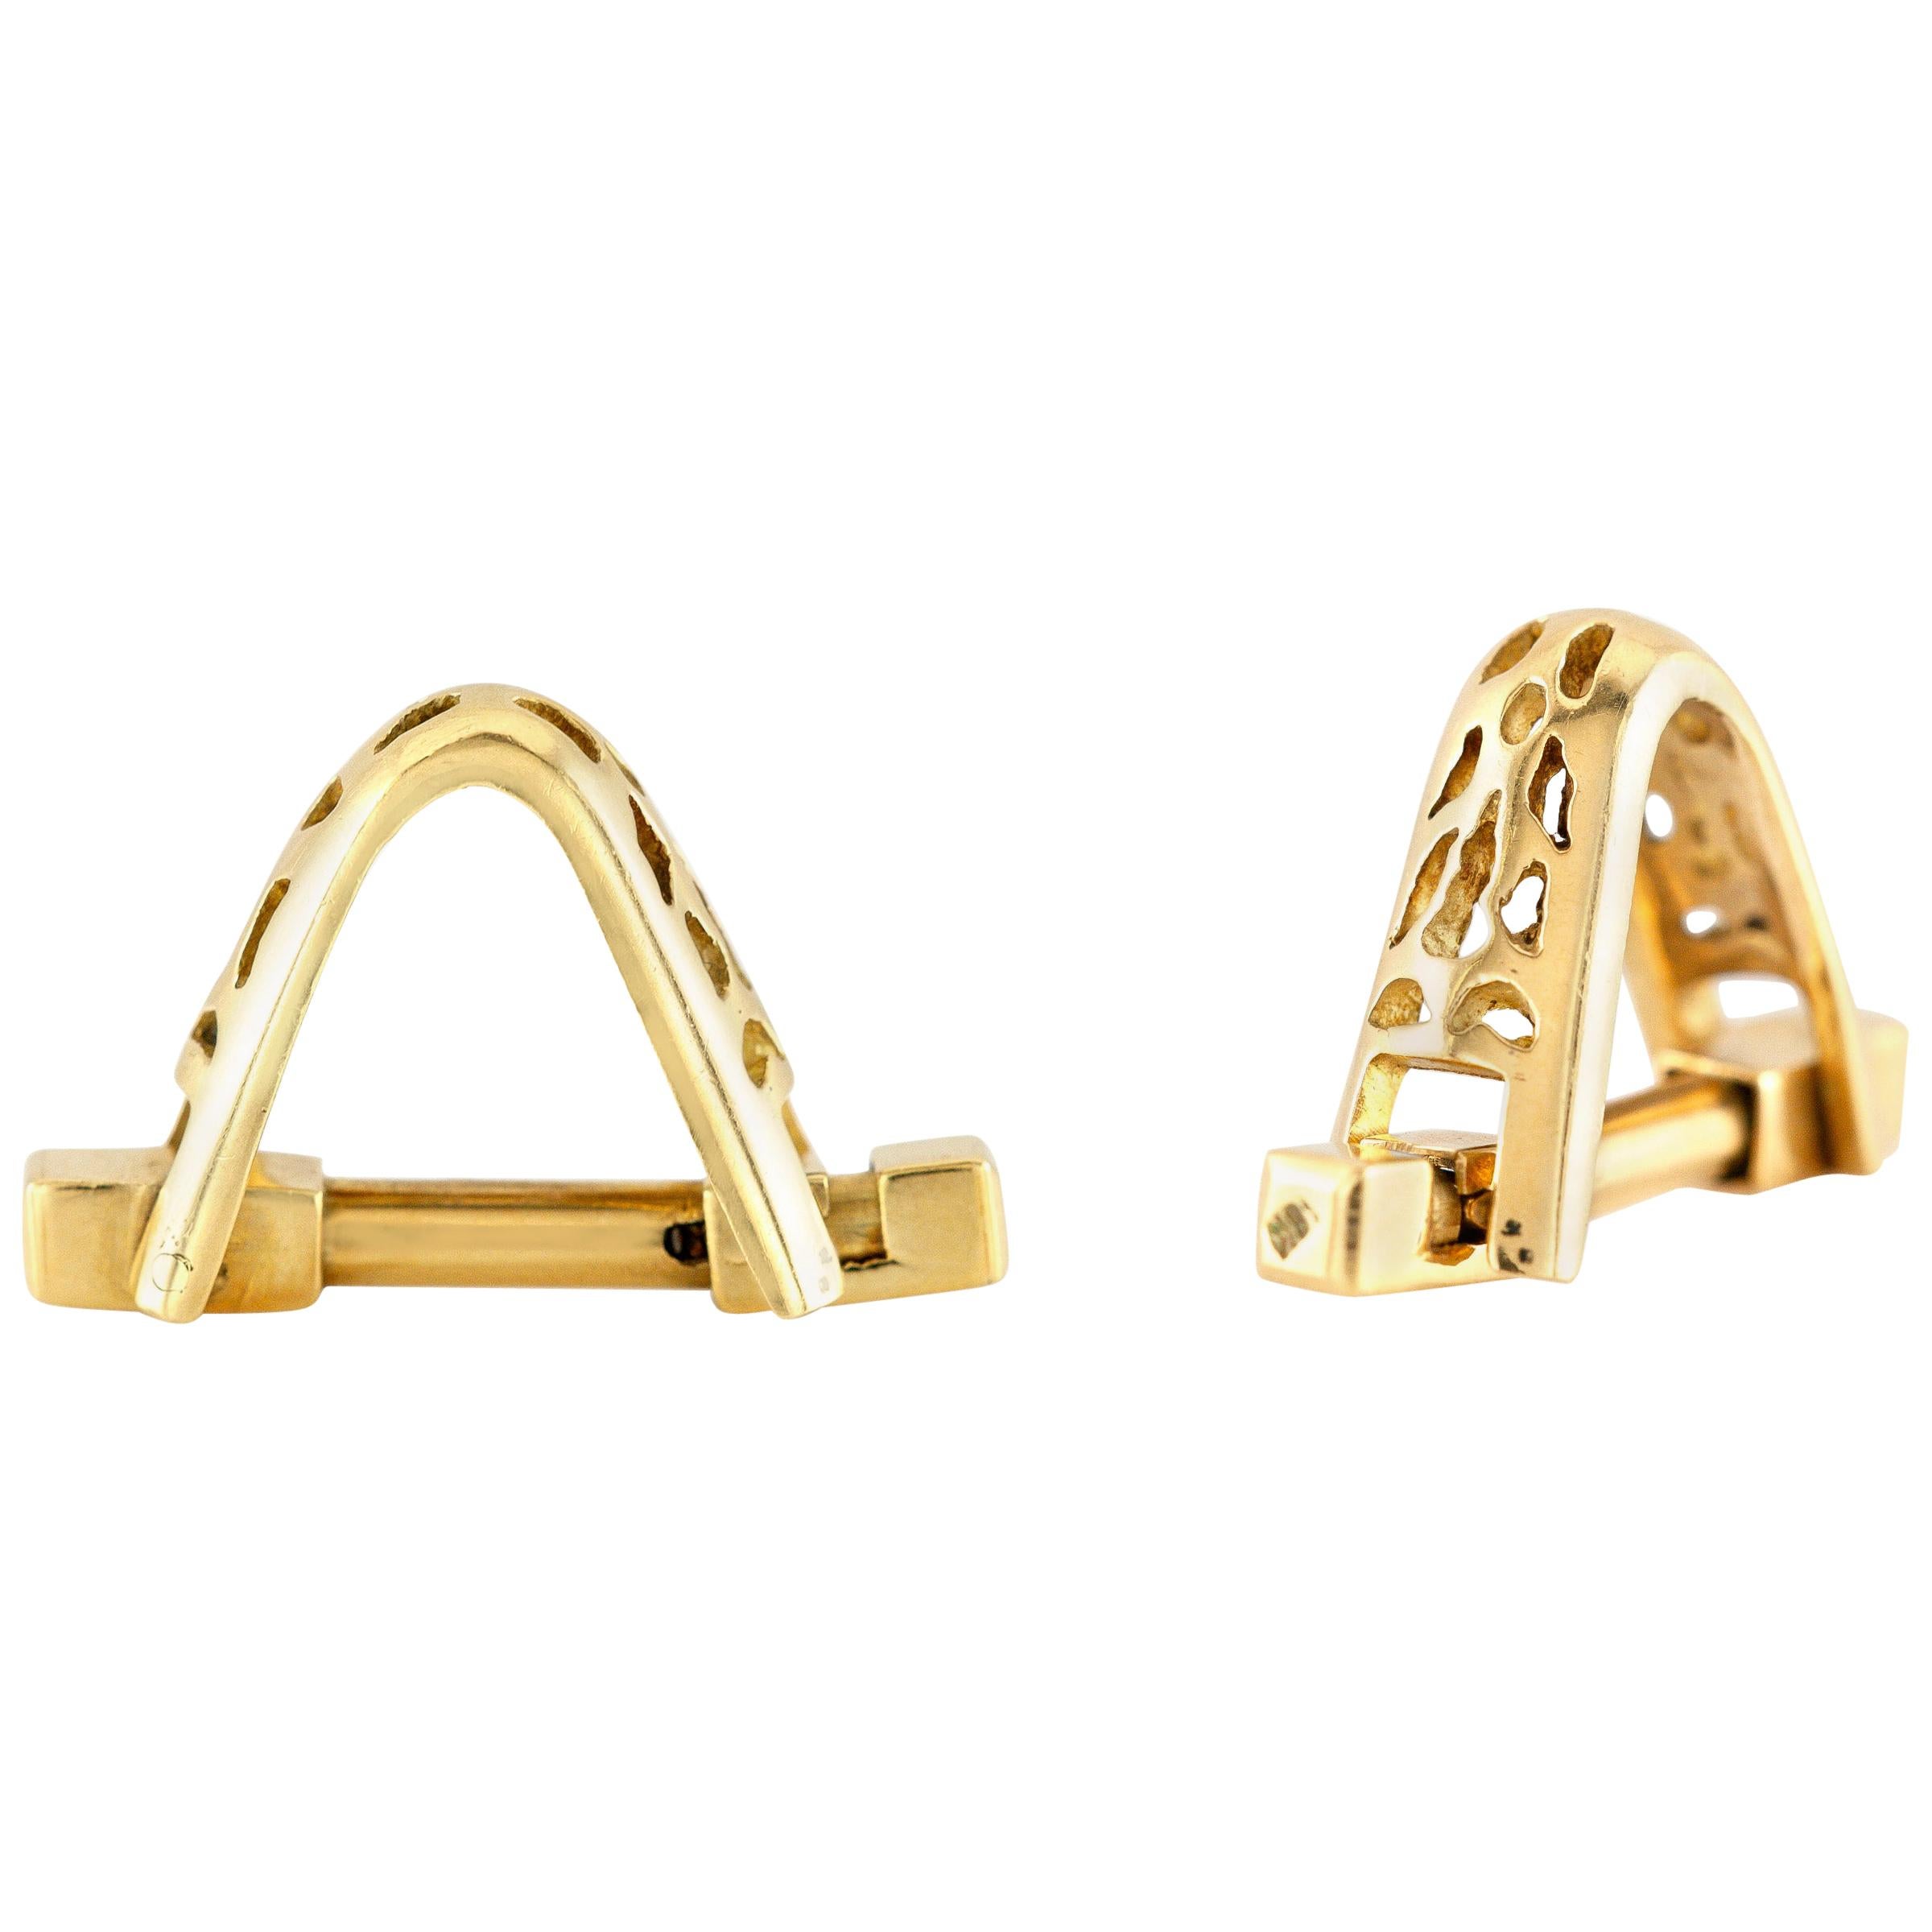 Curved Gold Cufflinks with Holes